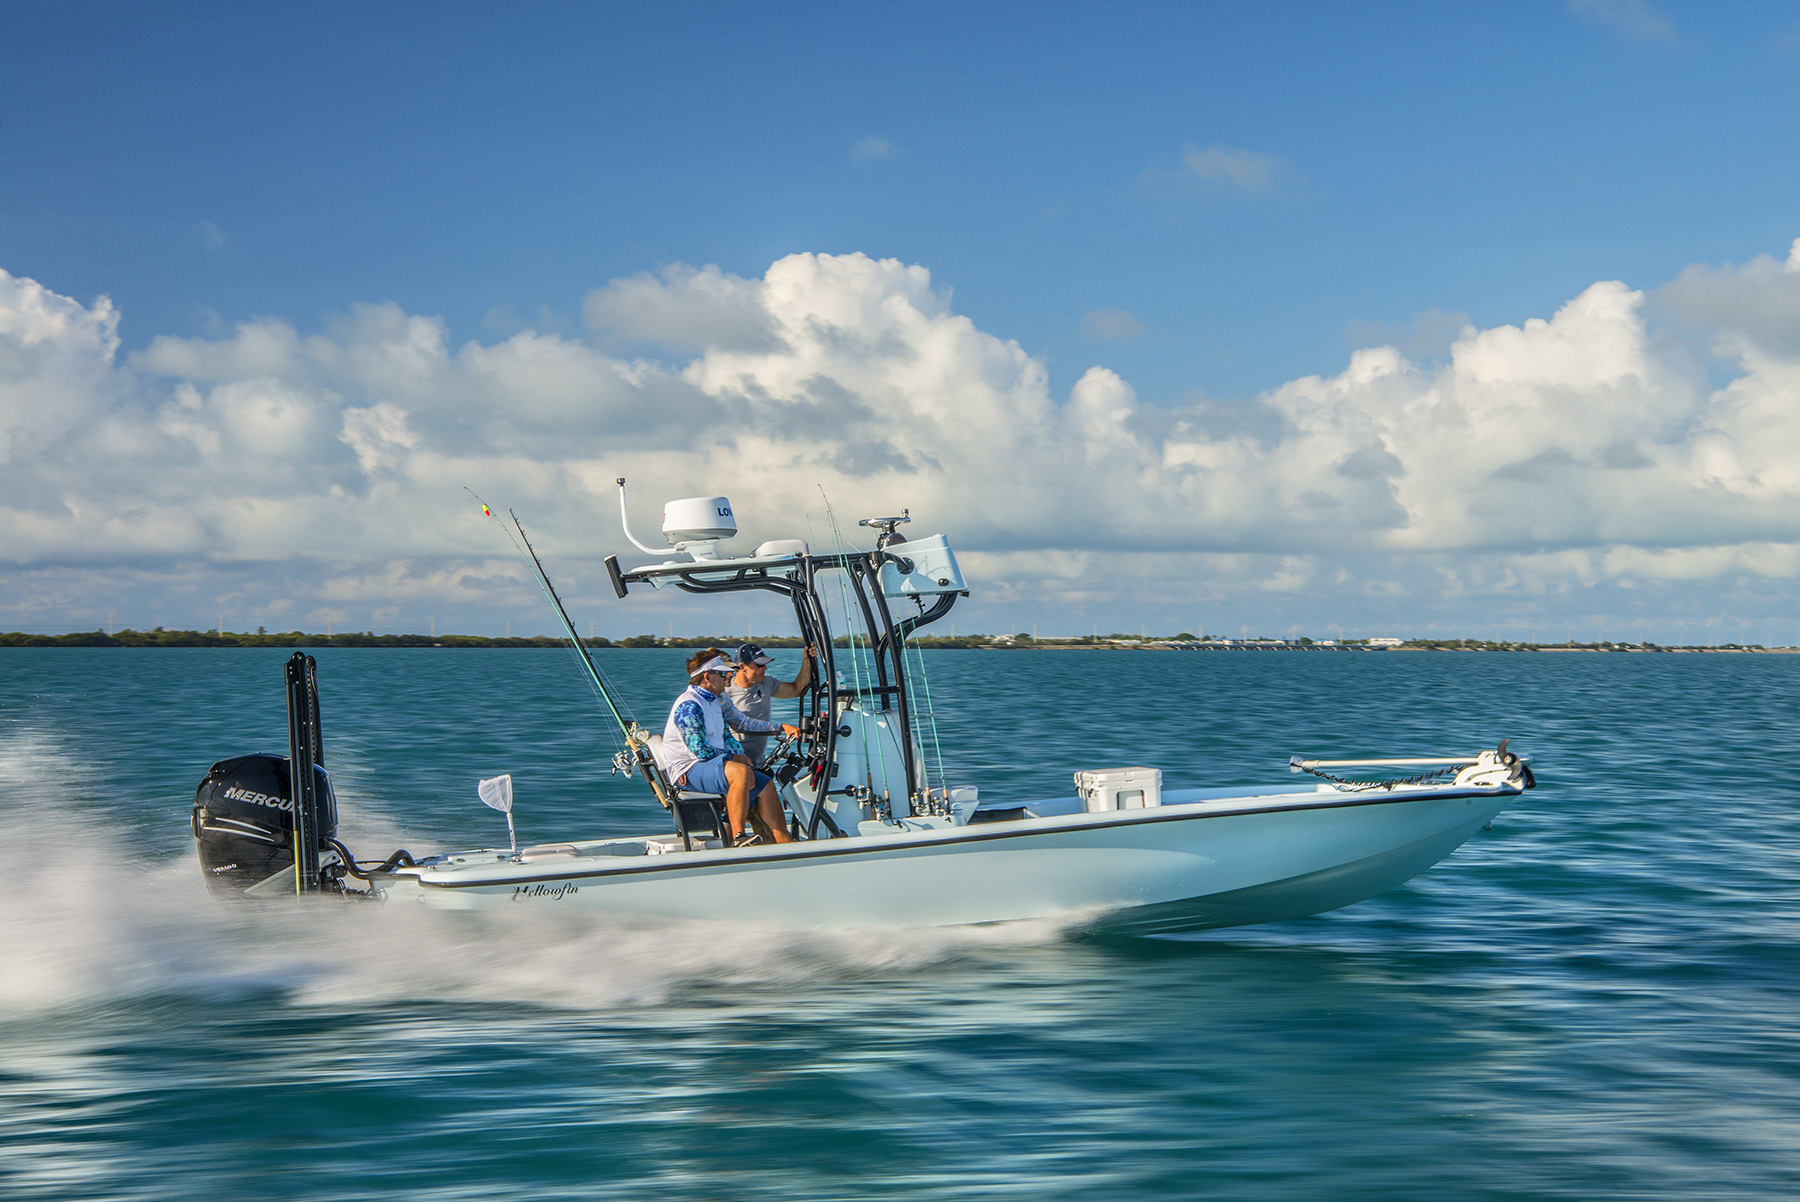 saltwater-experience-headed-out-to-catch-permit-aat-hawks-cay-in-the-florida-keys